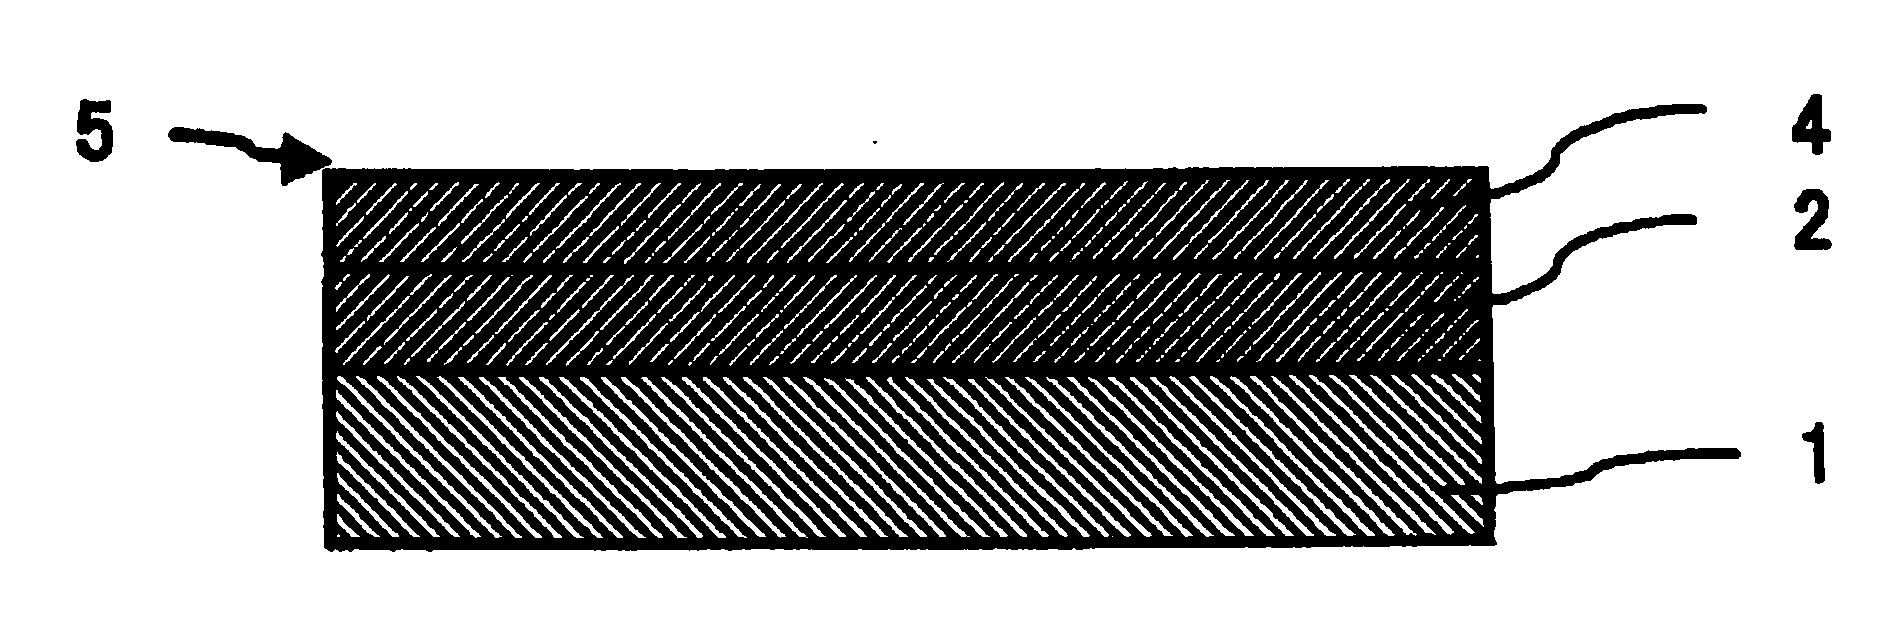 Hard-coated film, method of manufacturing the same, optical device, and image display